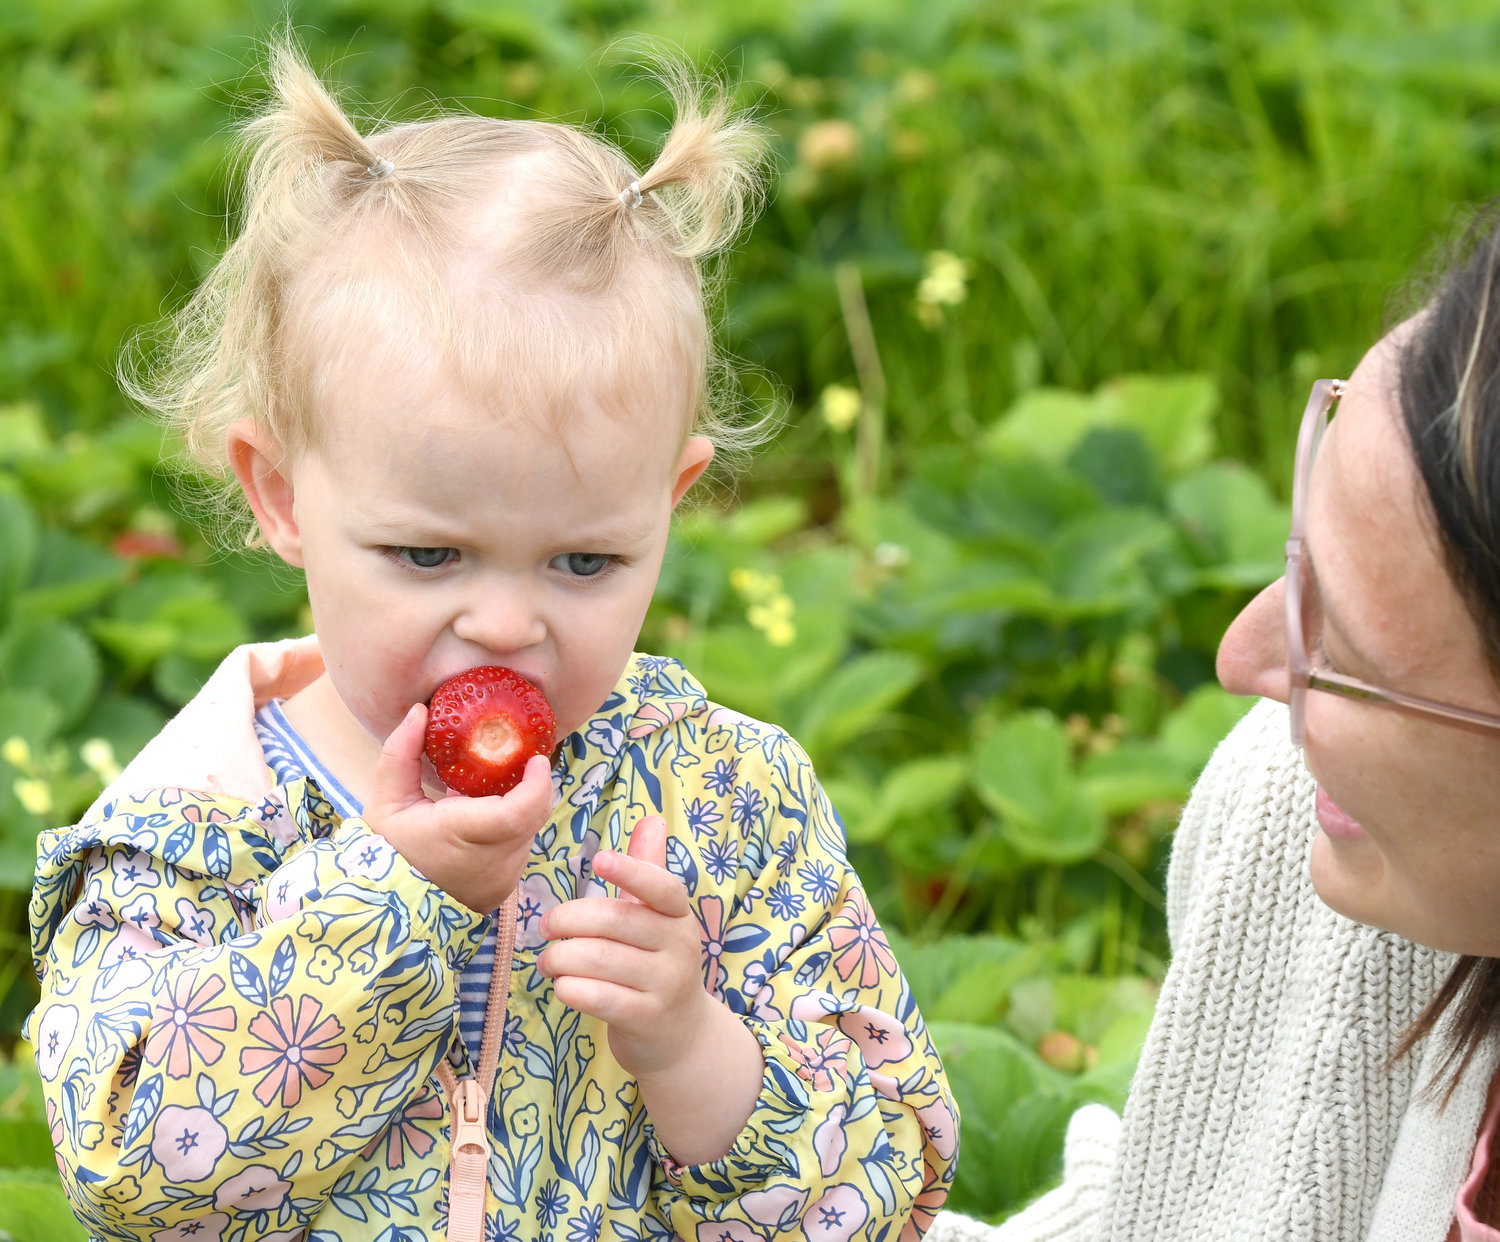 Kenley Cossitt-Yager, 2, enjoys a big ripe strawberry at Swistak Strawberry Farm, 6644 Greenway-New London Road, Verona, with her mom, Desiree Cossitt-Yager, looking on Wednesday. For the toddler, it was a tasty start to a special day — her second birthday. (Sentinel photo by John Clifford)